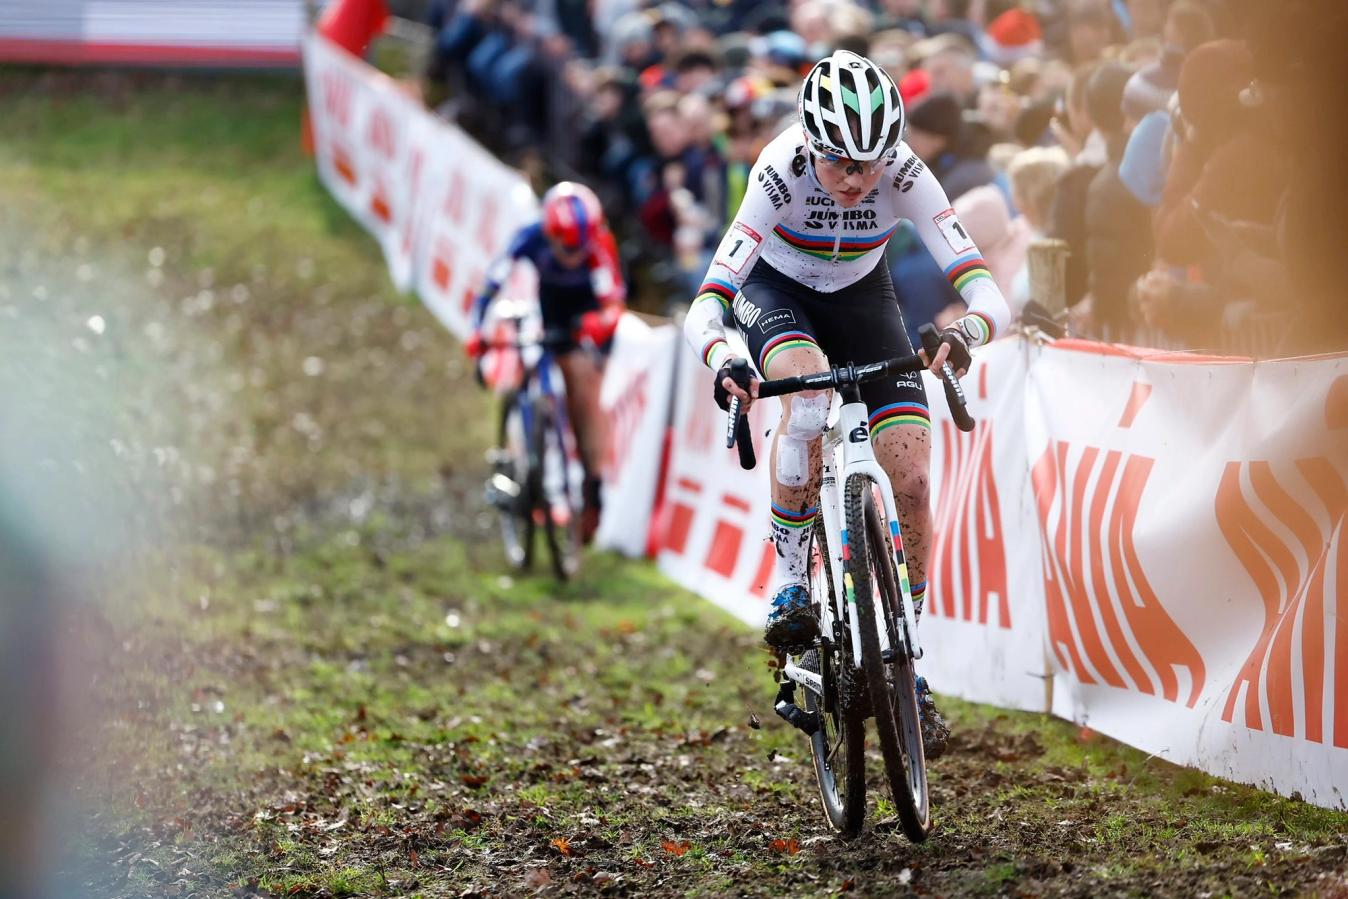 Fem van Empel has sported the rainbow jersey for all of her dominant wins this season